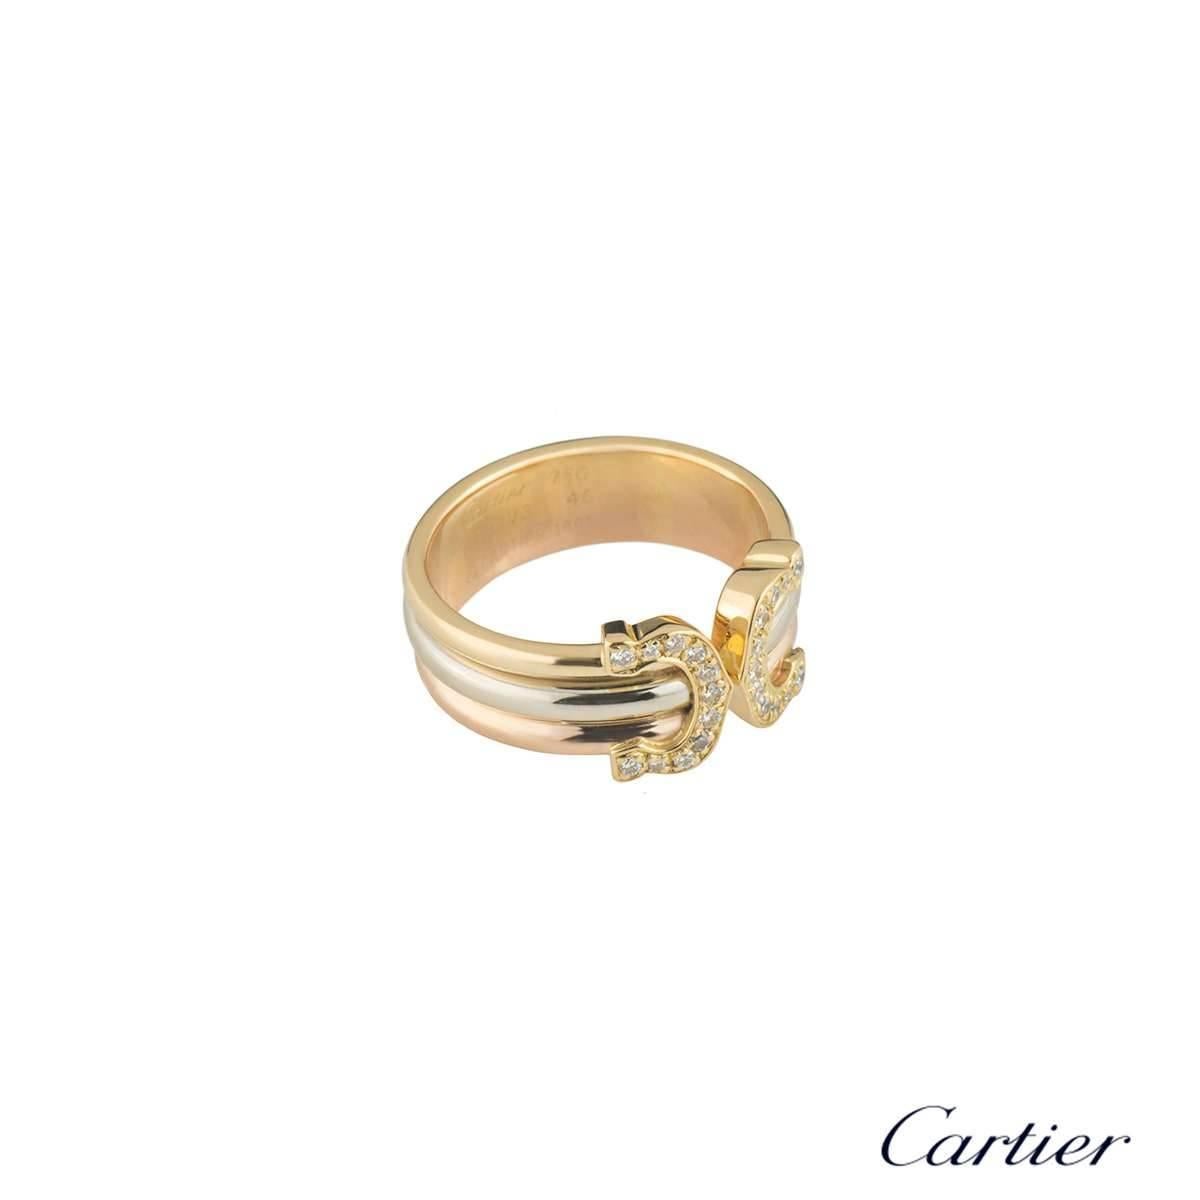 A unique 18k tri-colour gold ring from the Ce de Cartier collection by Cartier. This ring comprises of an open design with an iconic C motif at each end. Each motif is set with 11 round brilliant cut diamonds graduating in size in a pave setting,